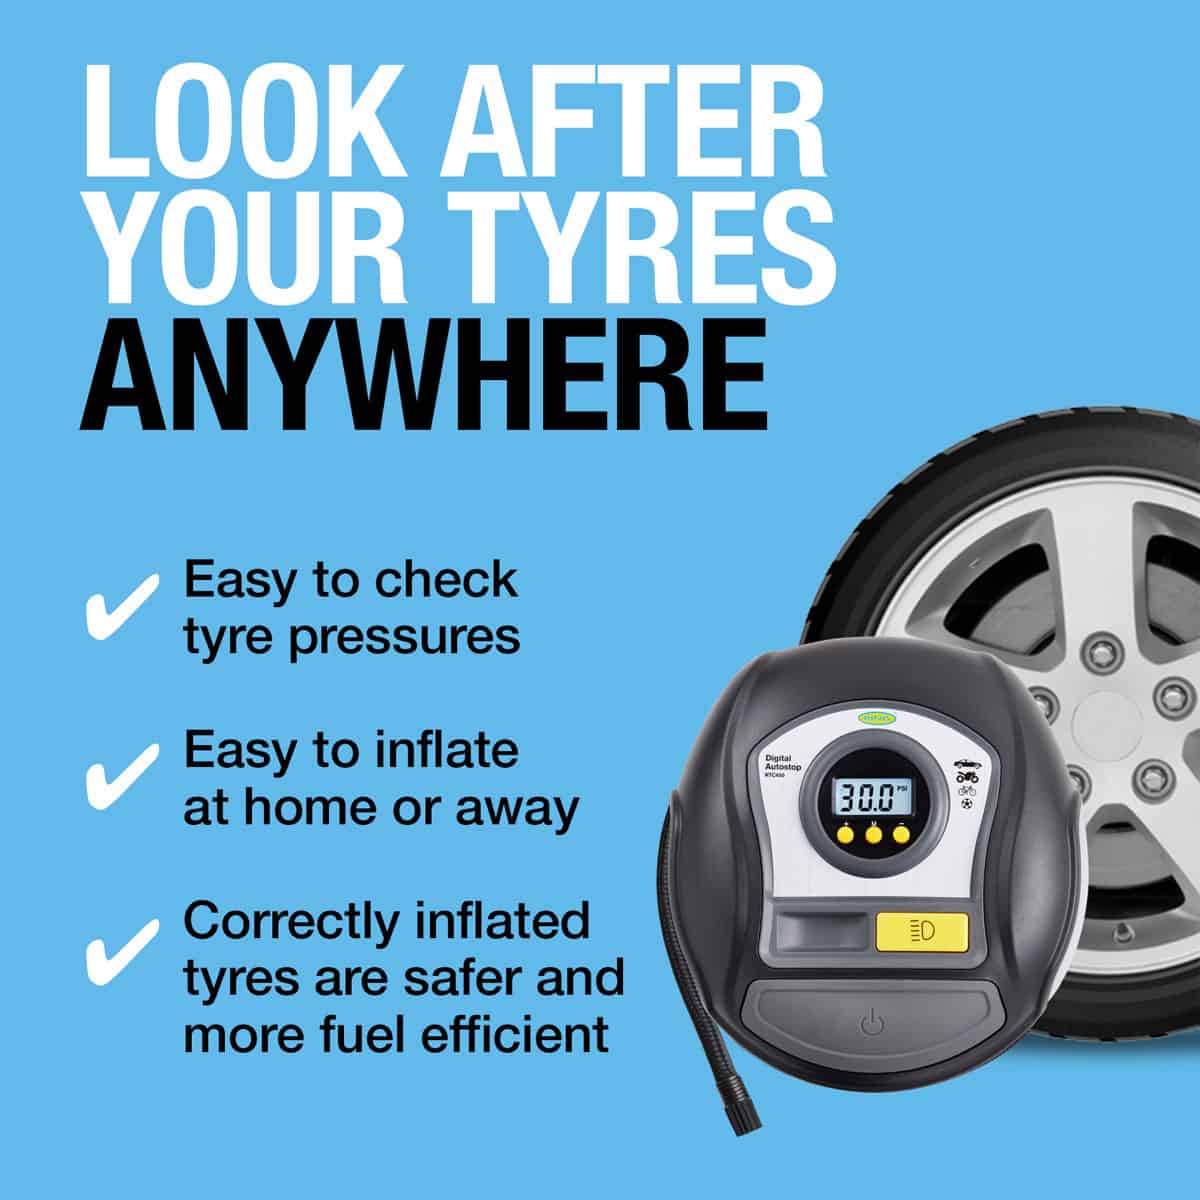 RTC450 Digital Auto-Stop Tyre Inflator: Fast and Efficient Inflation: Inflates a 13" tyre from flat to full in just 3.5 minutes.